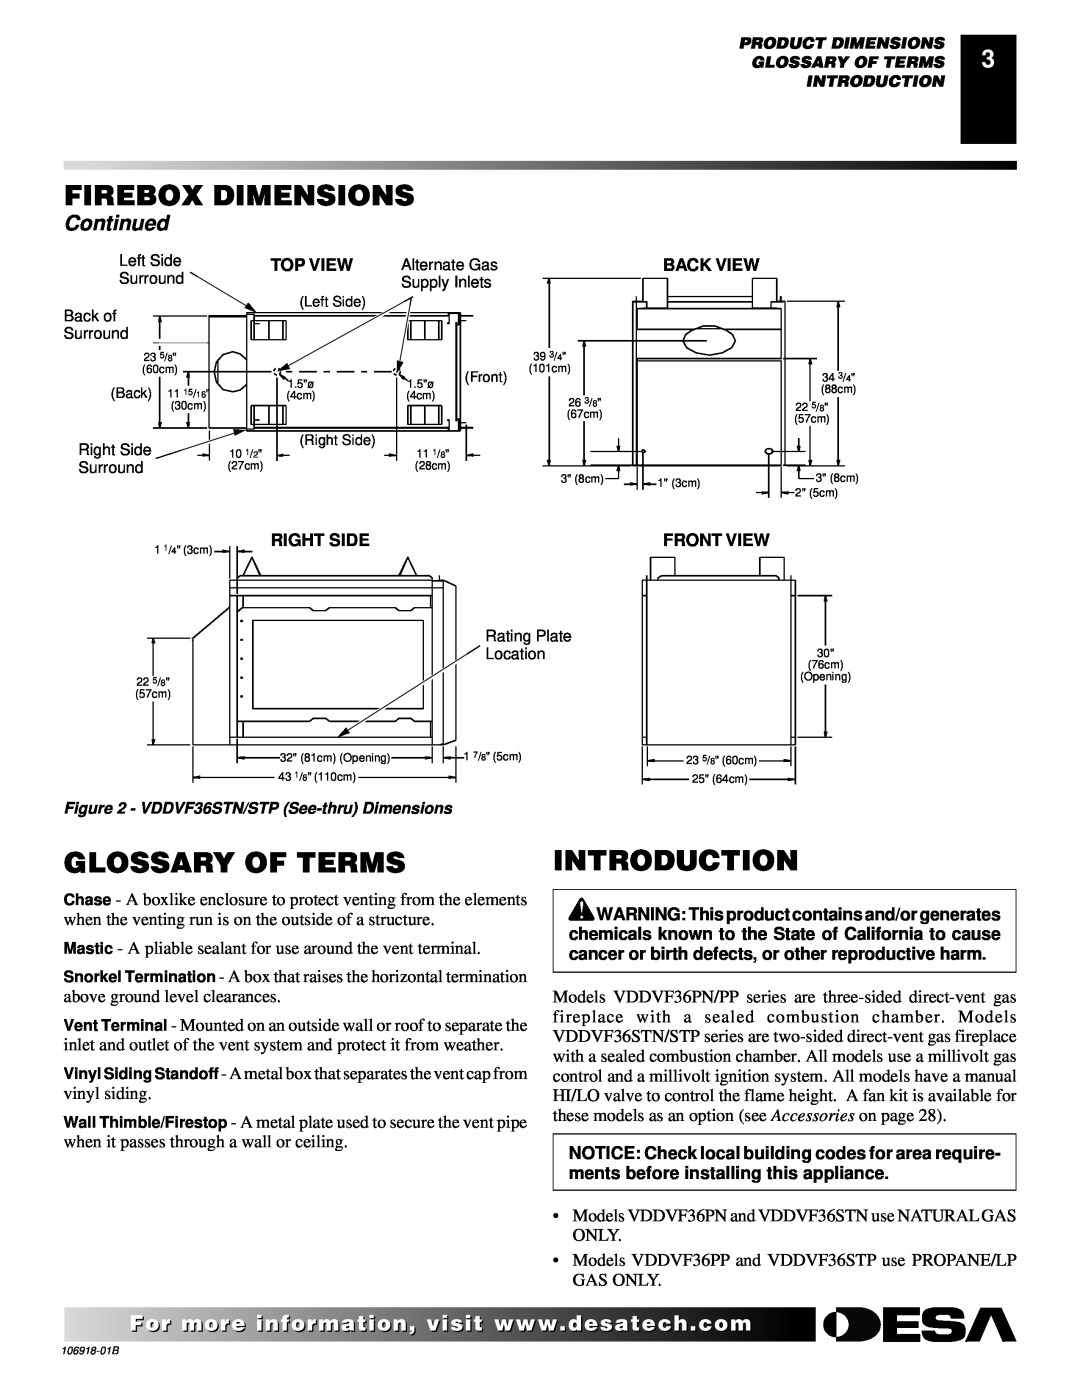 Desa VDDVF36STN/STP Firebox Dimensions, Glossary Of Terms, Introduction, Continued, Top View, Back View, Right Side 